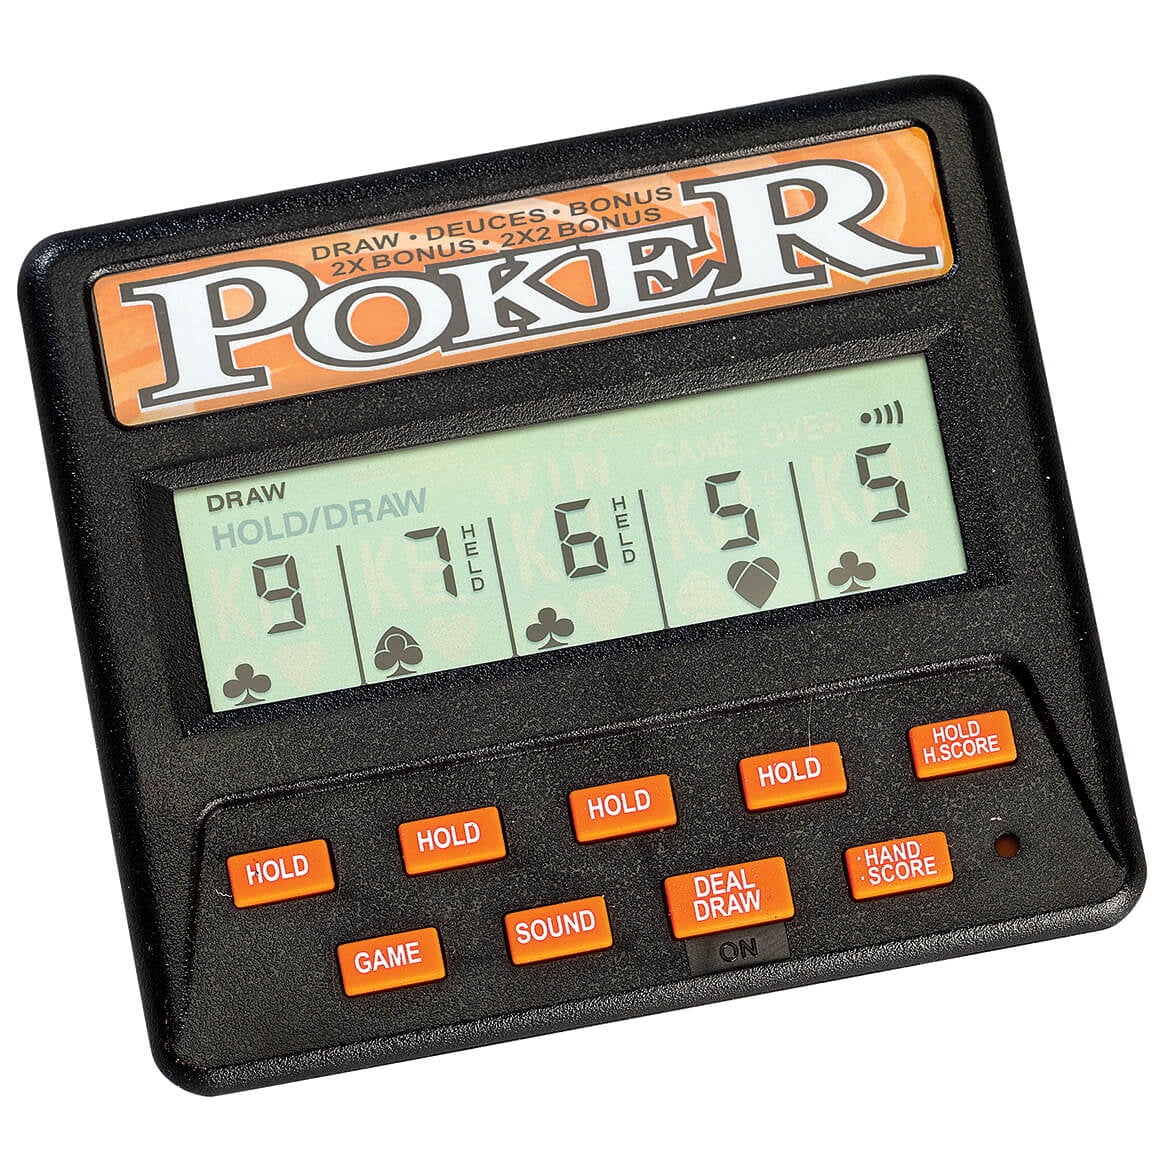 Pocket Arcade Miles Kimball Handheld Texas Hold EM Game Aa1 for sale online 